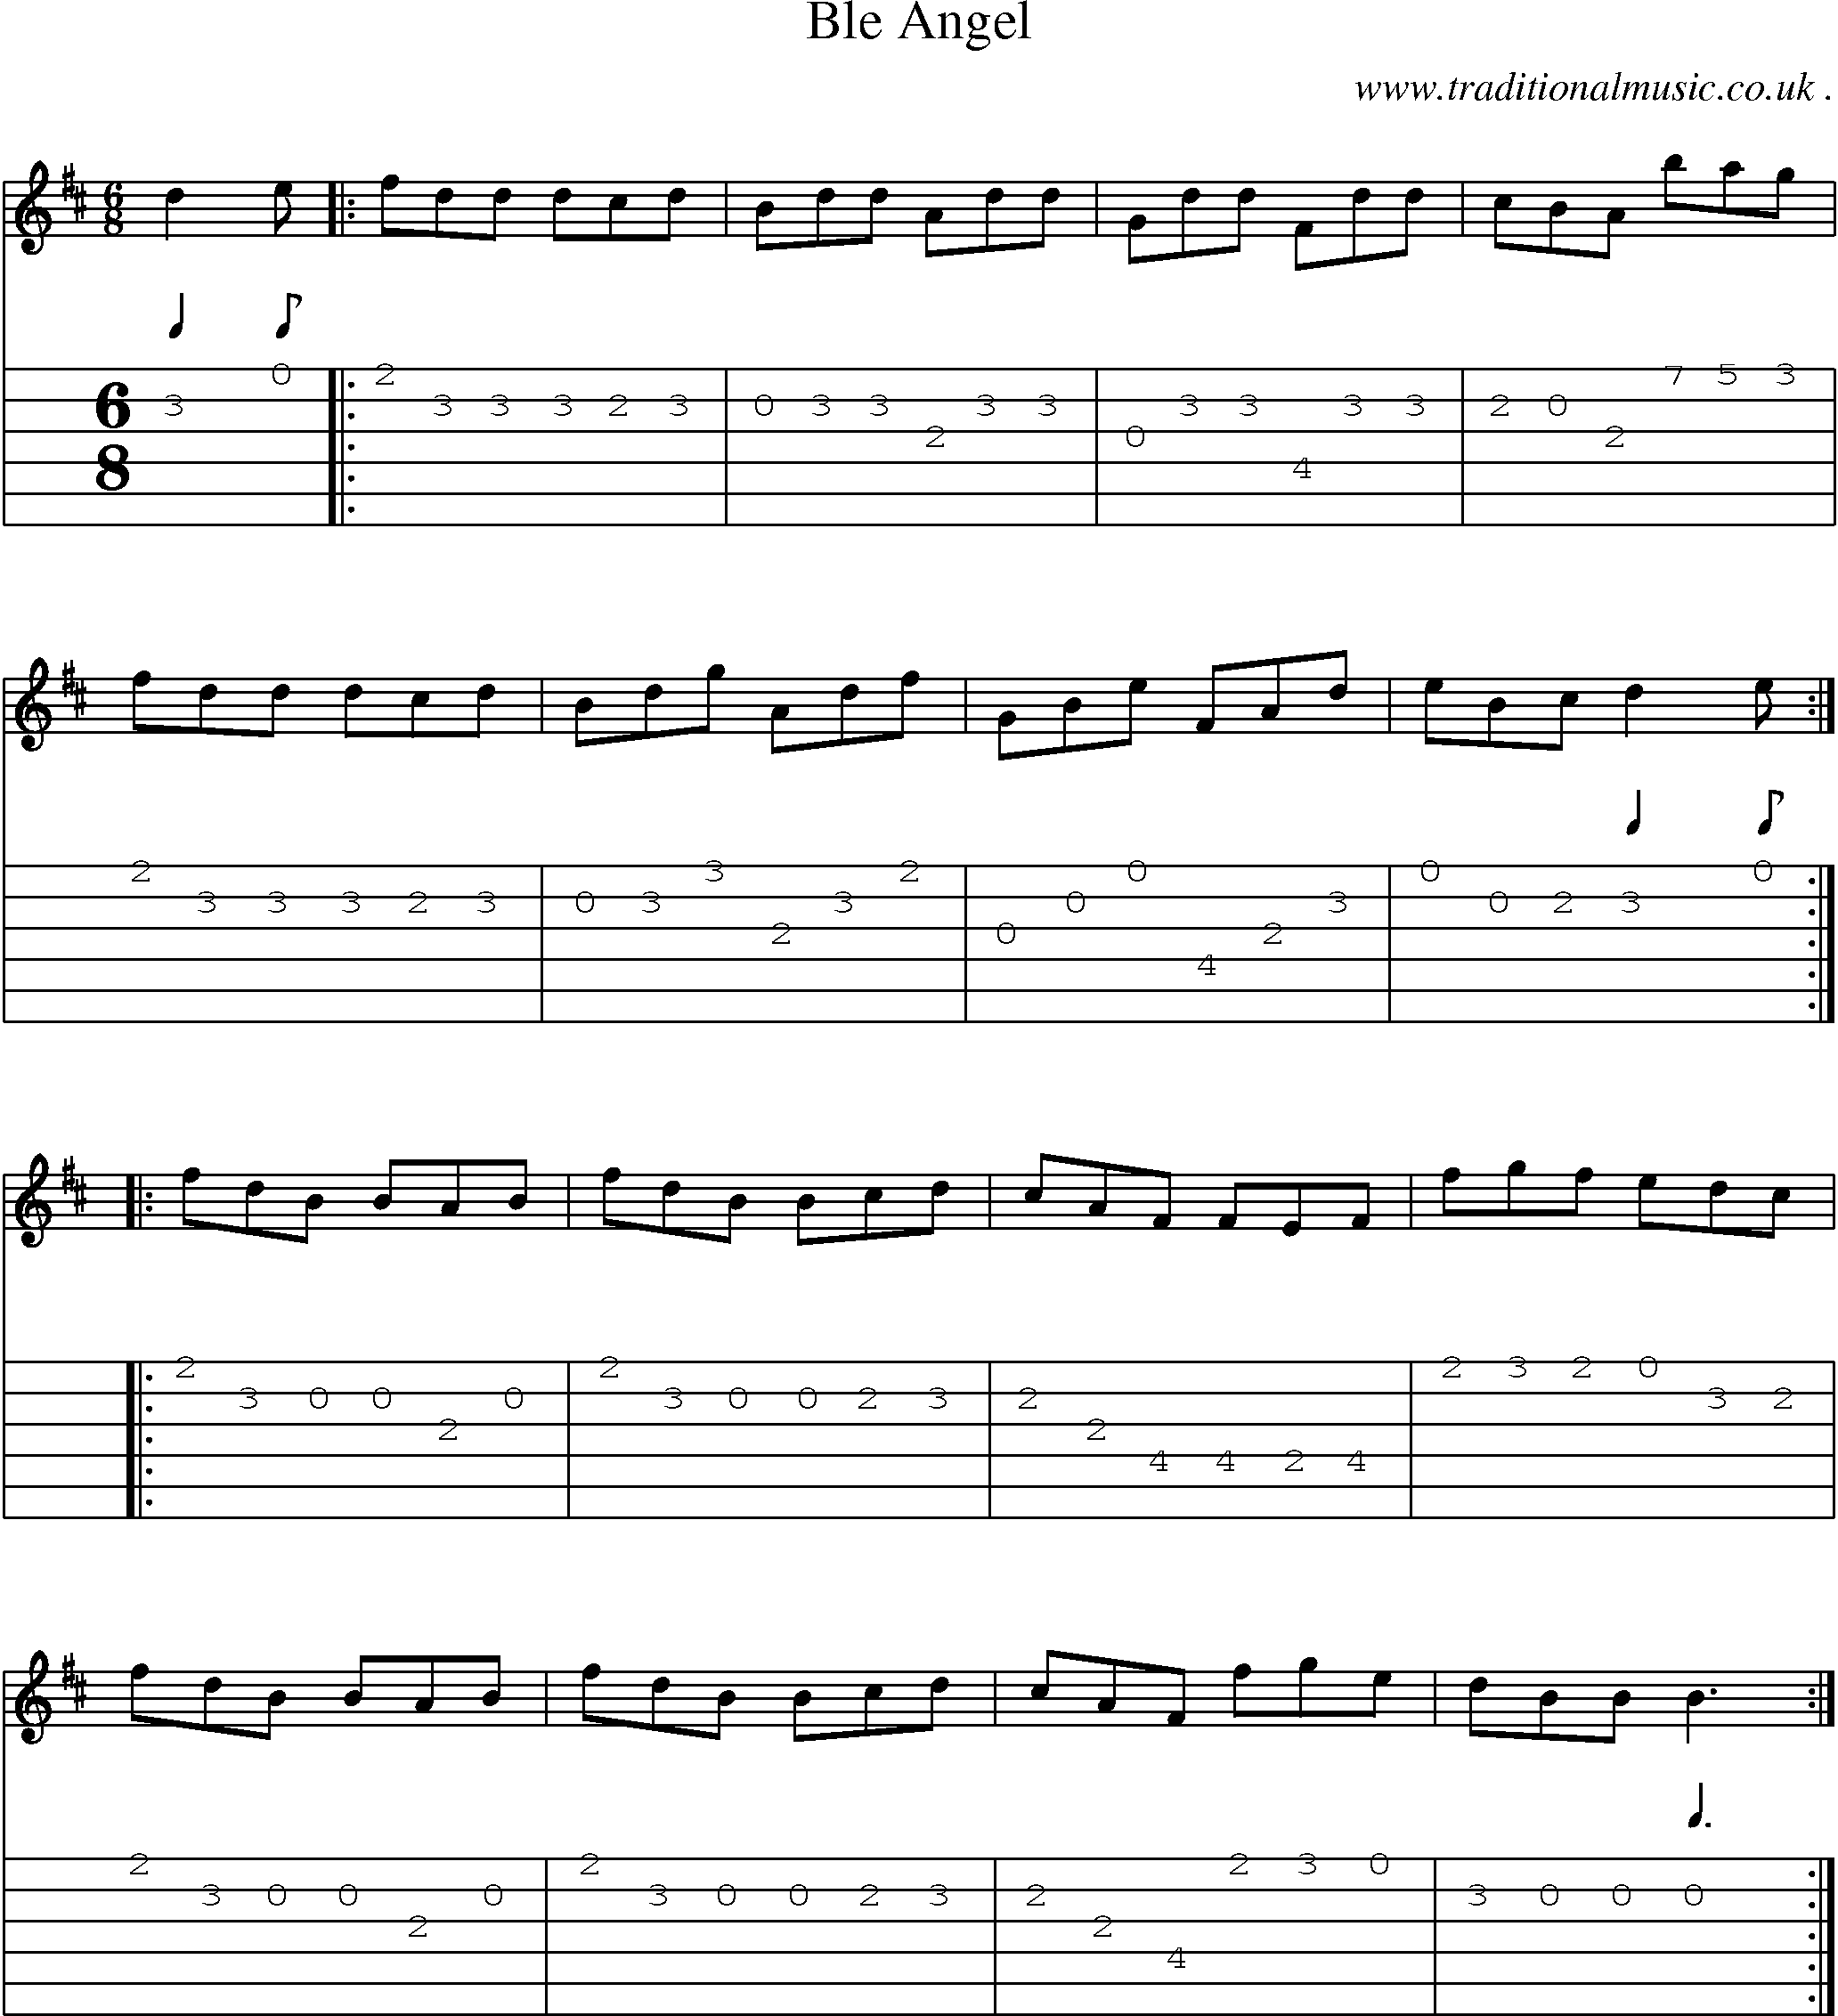 Sheet-Music and Guitar Tabs for Ble Angel